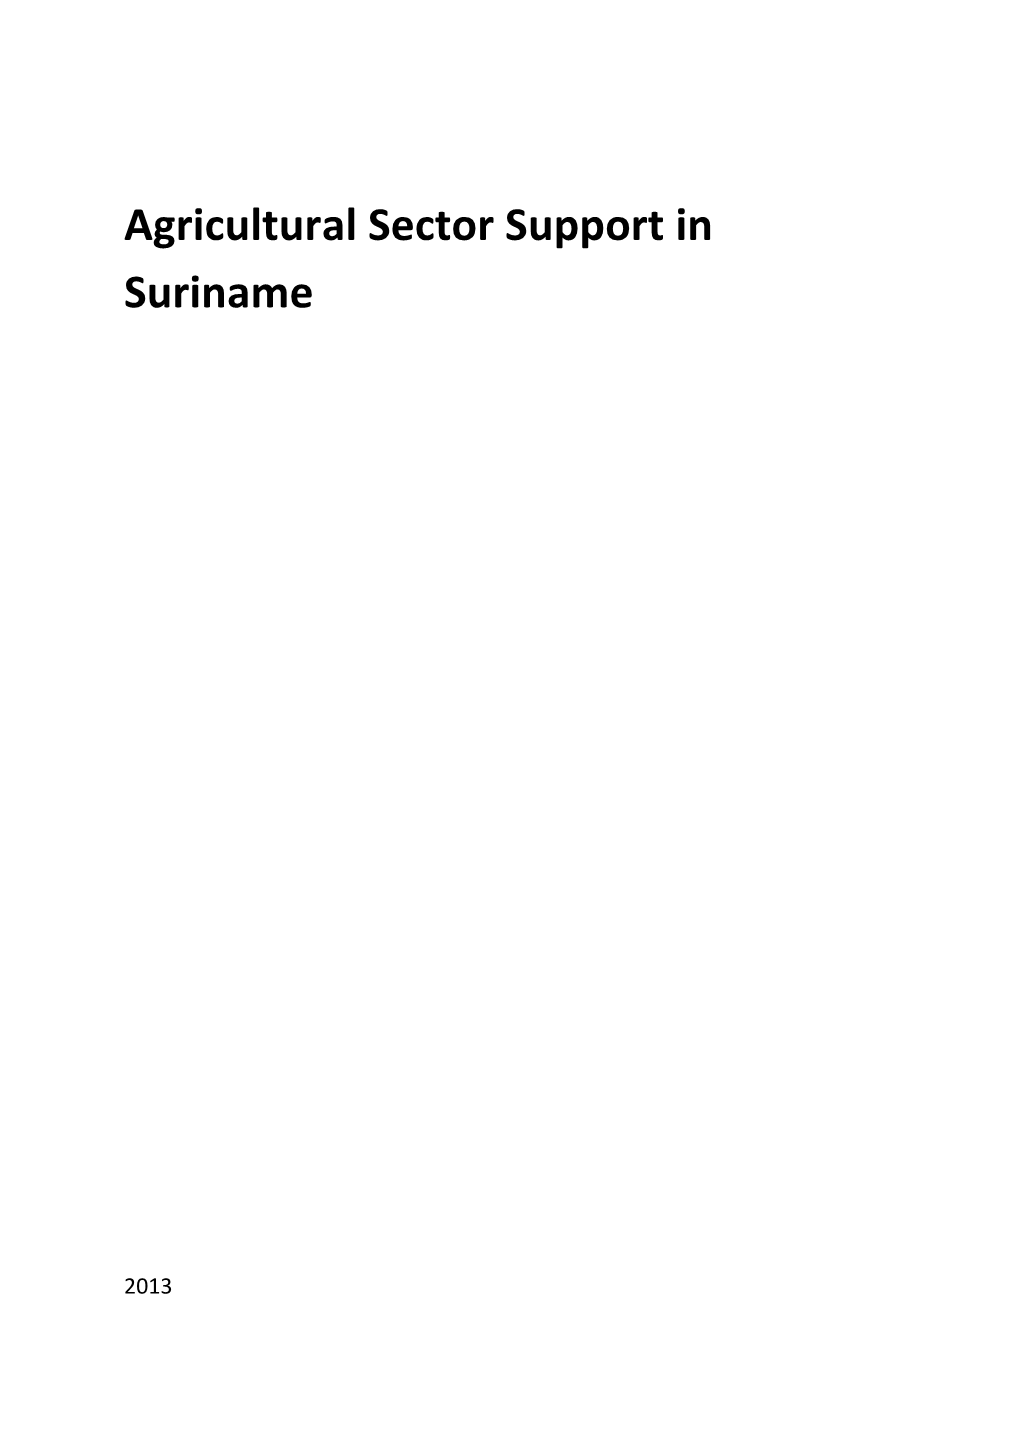 Agricultural Sector Support in Suriname